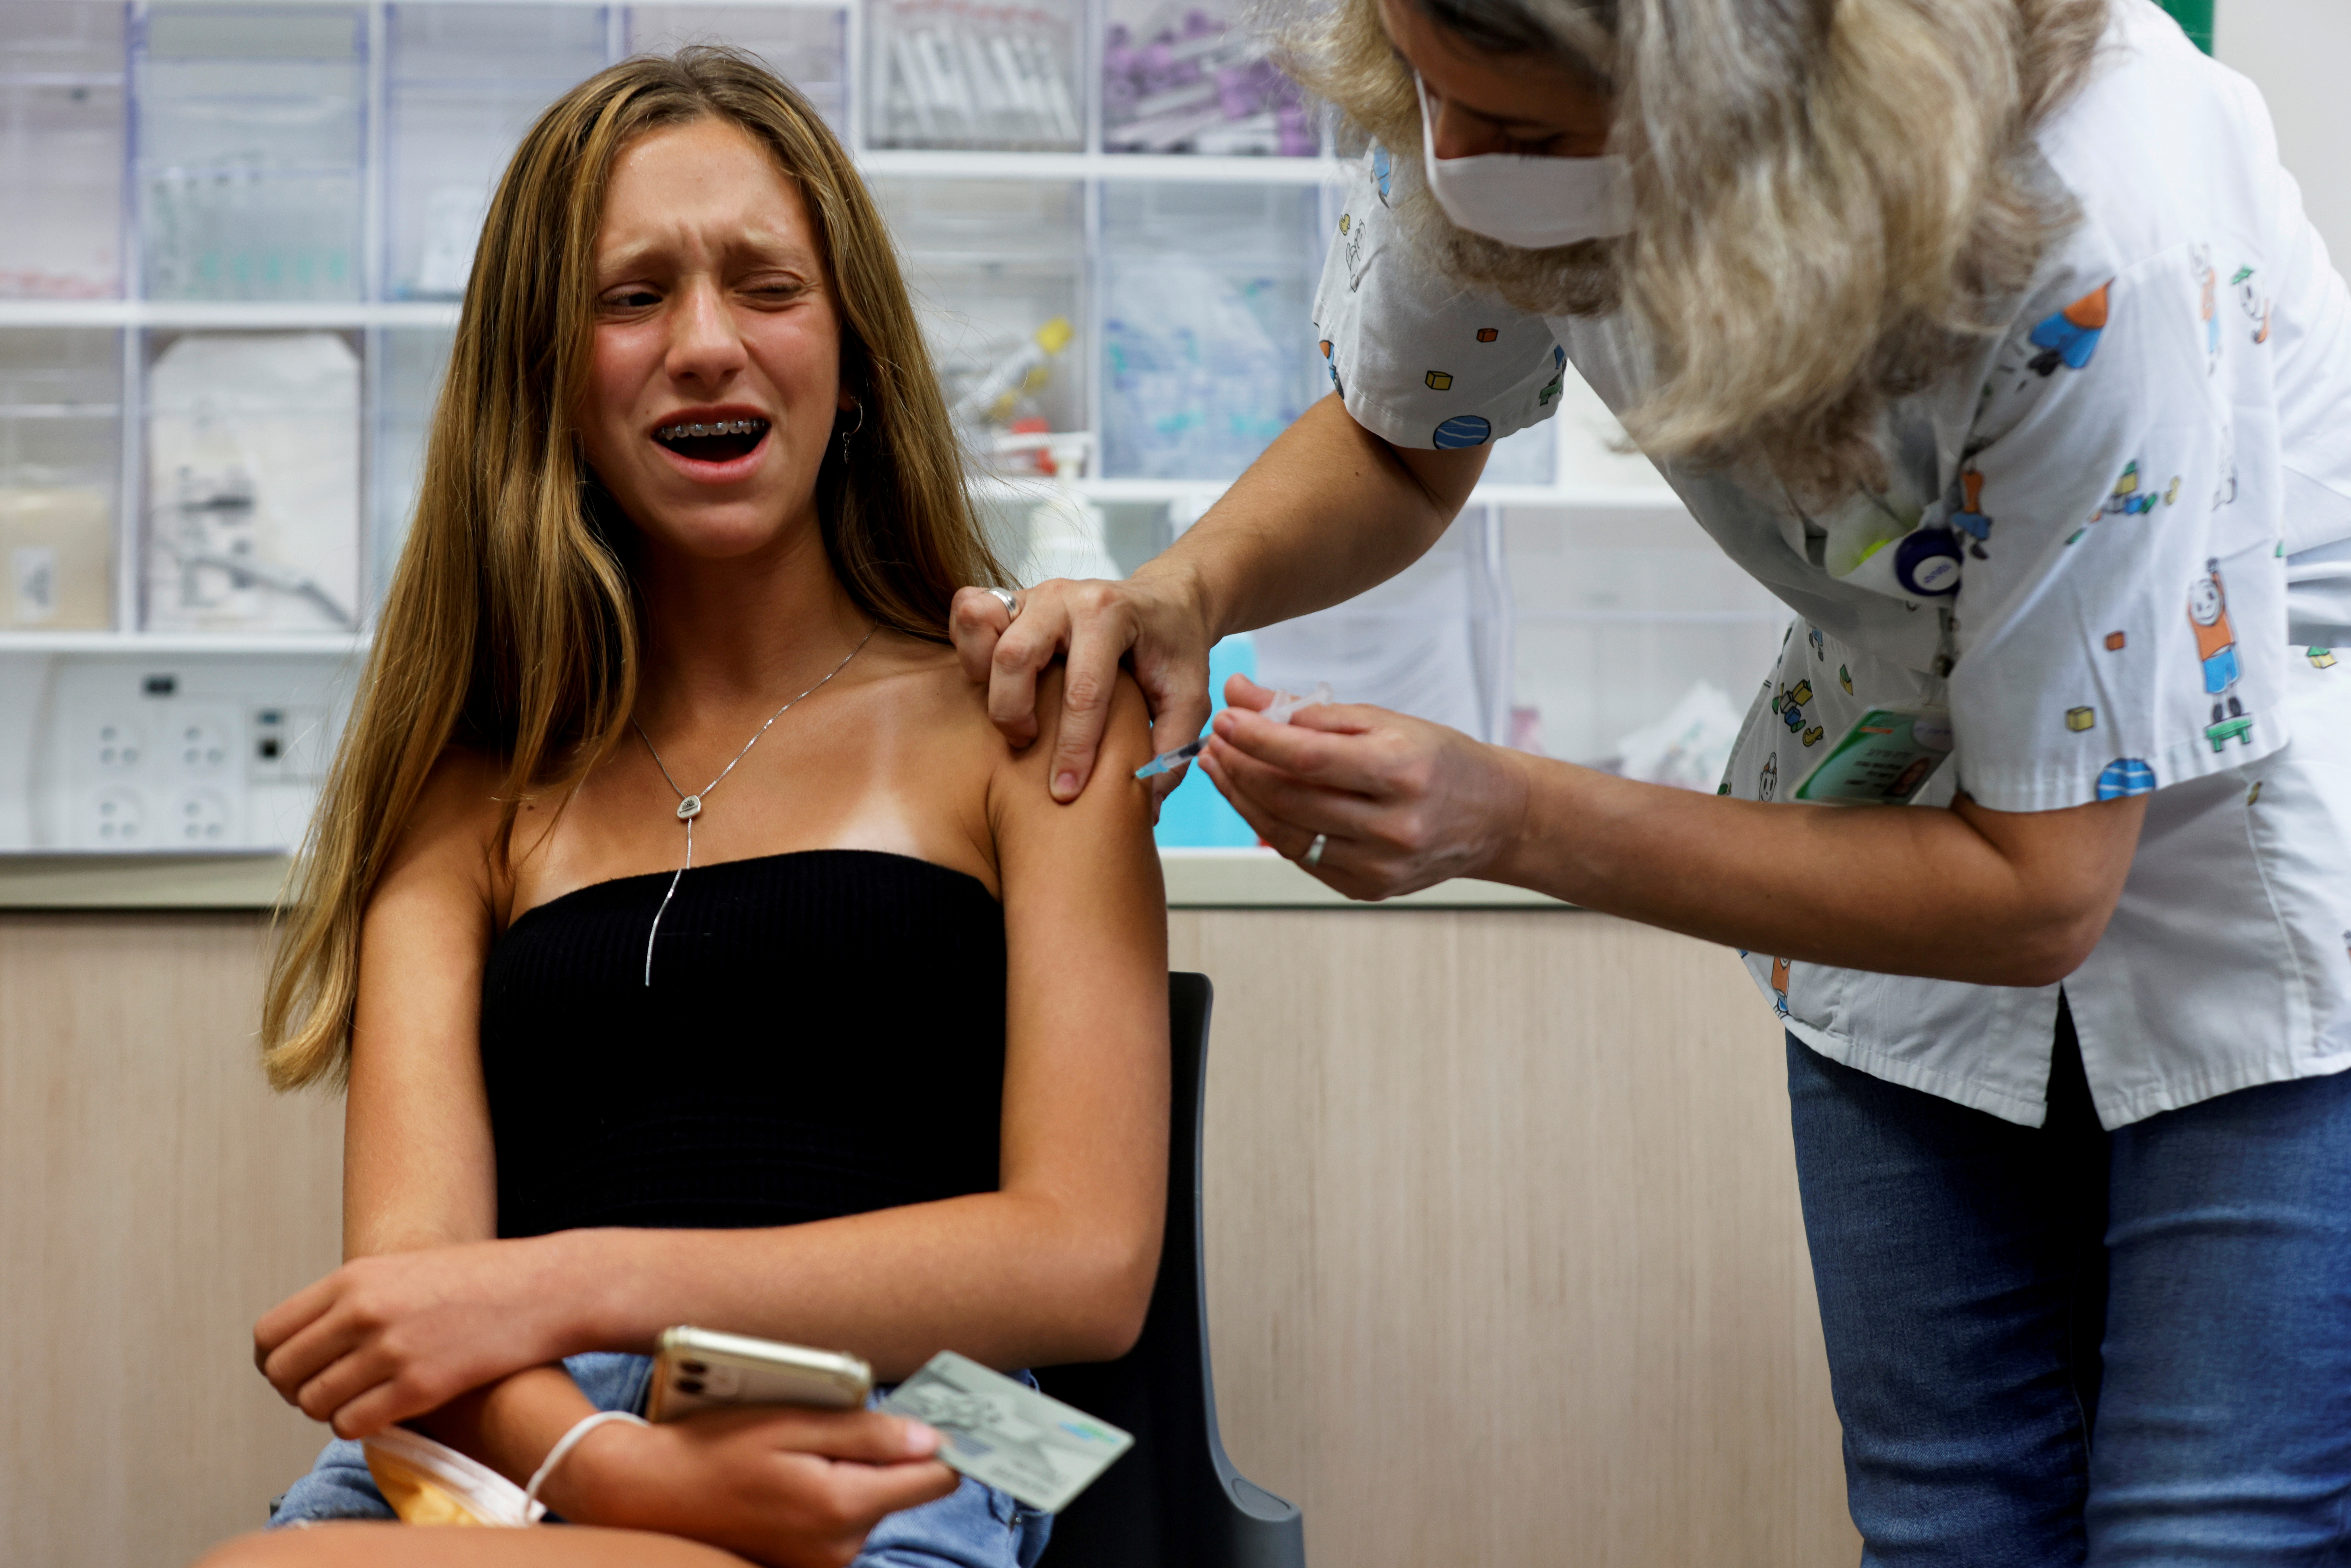 FILE PHOTO: A teenager reacts while receiving a dose of a vaccine against the coronavirus disease (COVID-19) as Israel urged more 12- to 15-year-olds to be vaccinated, citing new outbreaks attributed to the more infectious Delta variant, at a Clalit healthcare maintenance organisation in Tel Aviv, Israel June 21, 2021. REUTERS/Amir Cohen/File Photo